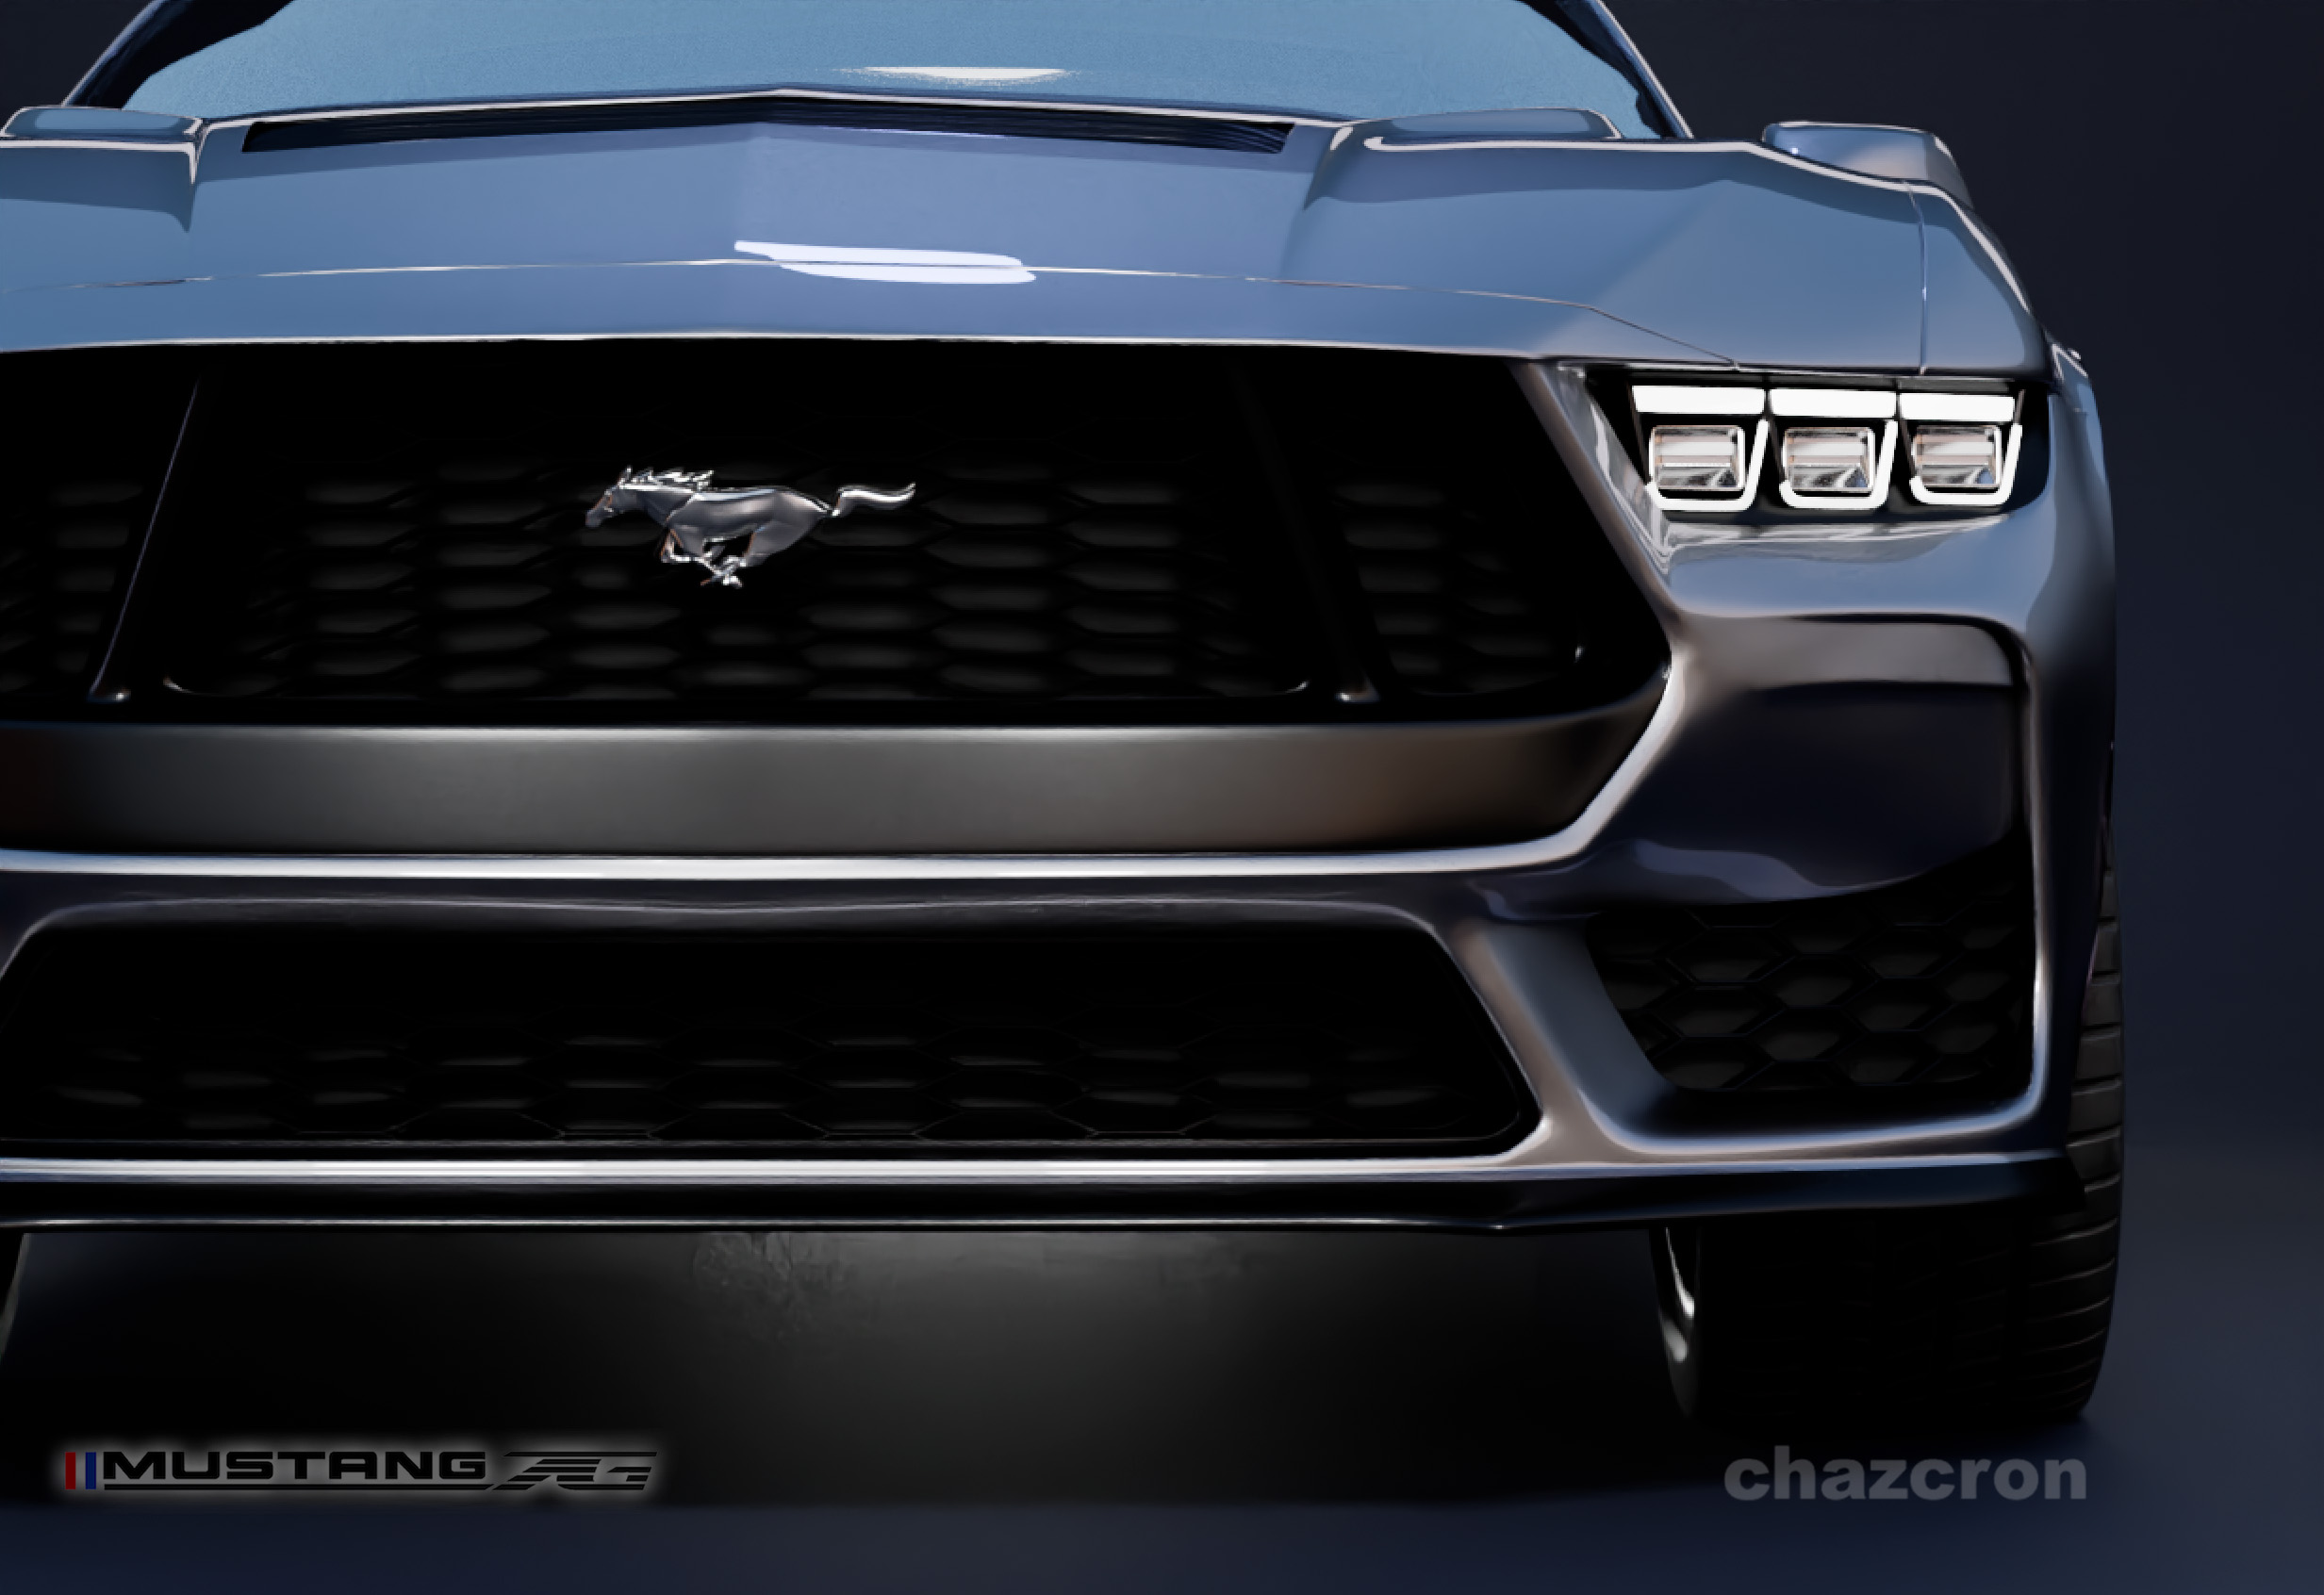 S650 Mustang chazcron weighs in... 7th gen 2023 Mustang S650 3D model & renderings in several colors! SilverTongue2